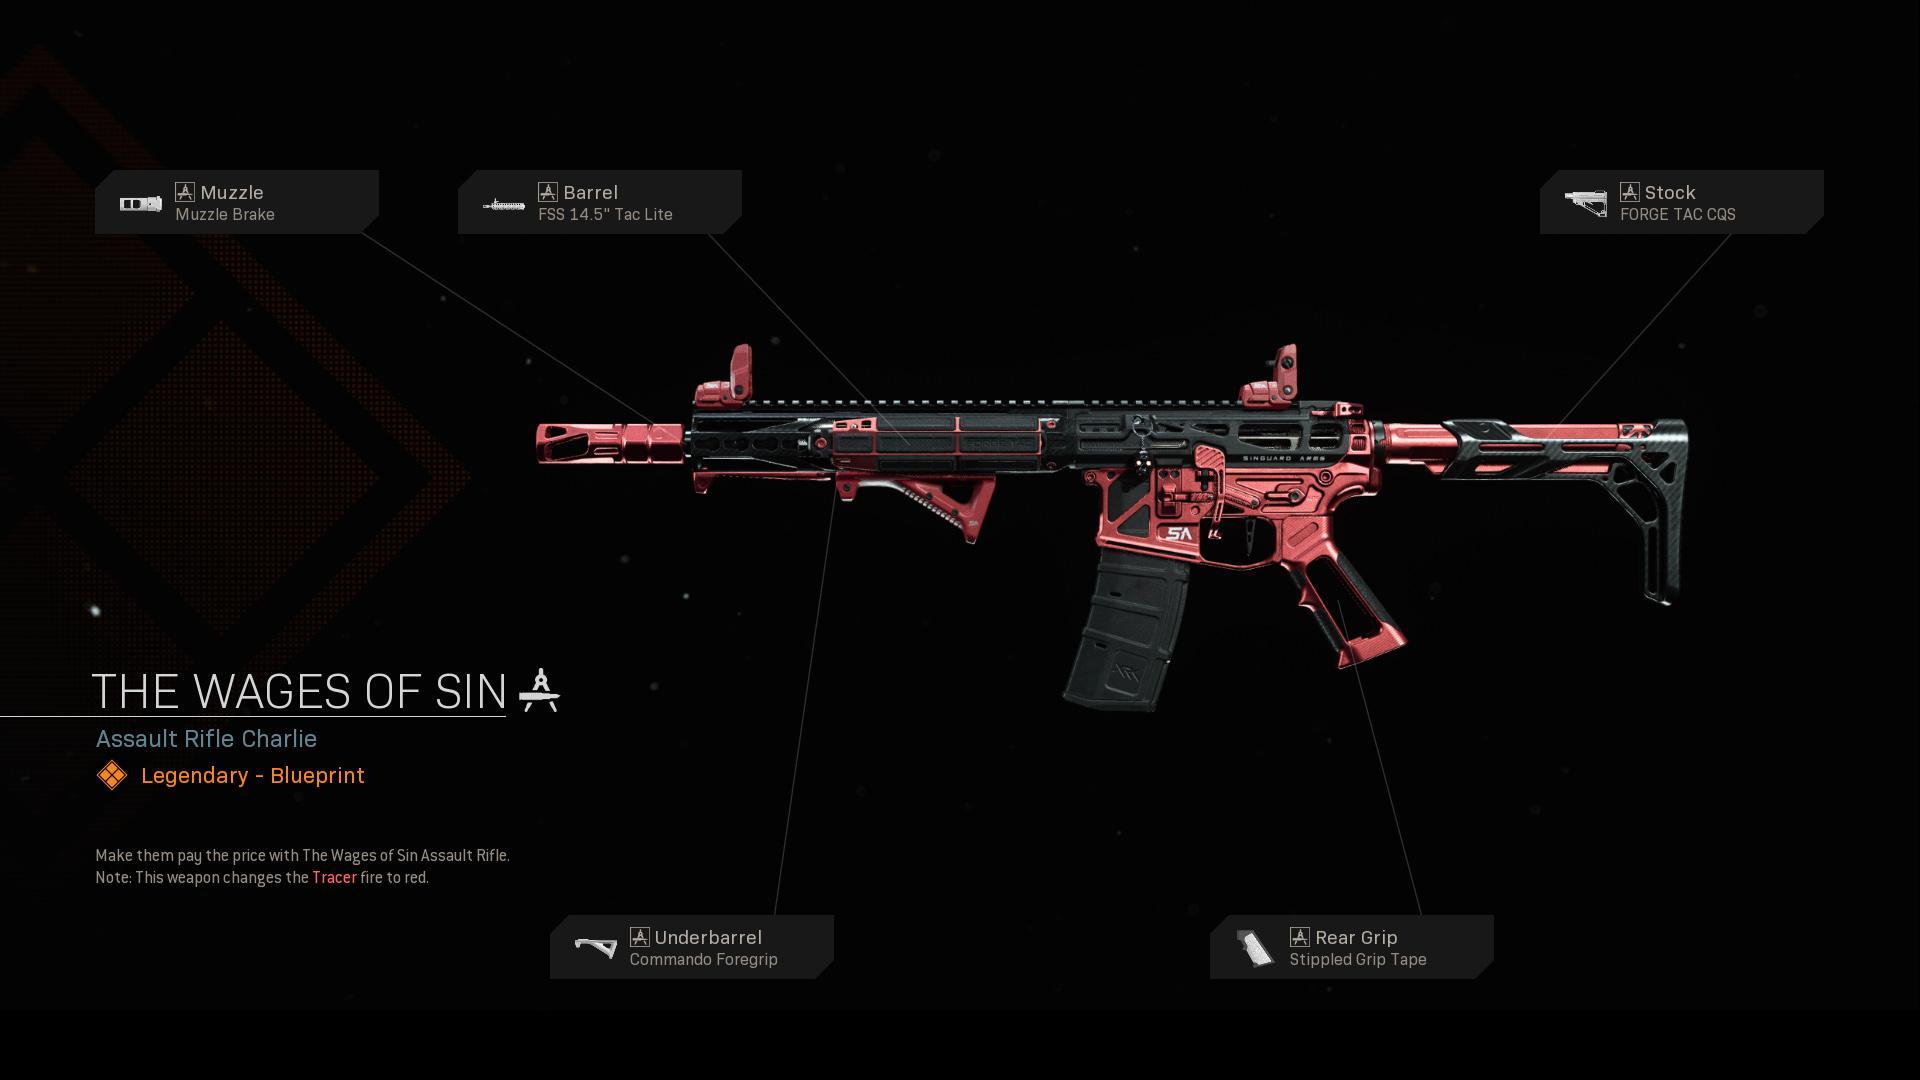 The The Wages of Sin is a Weapon Blueprint available in Call of Duty: Moder...